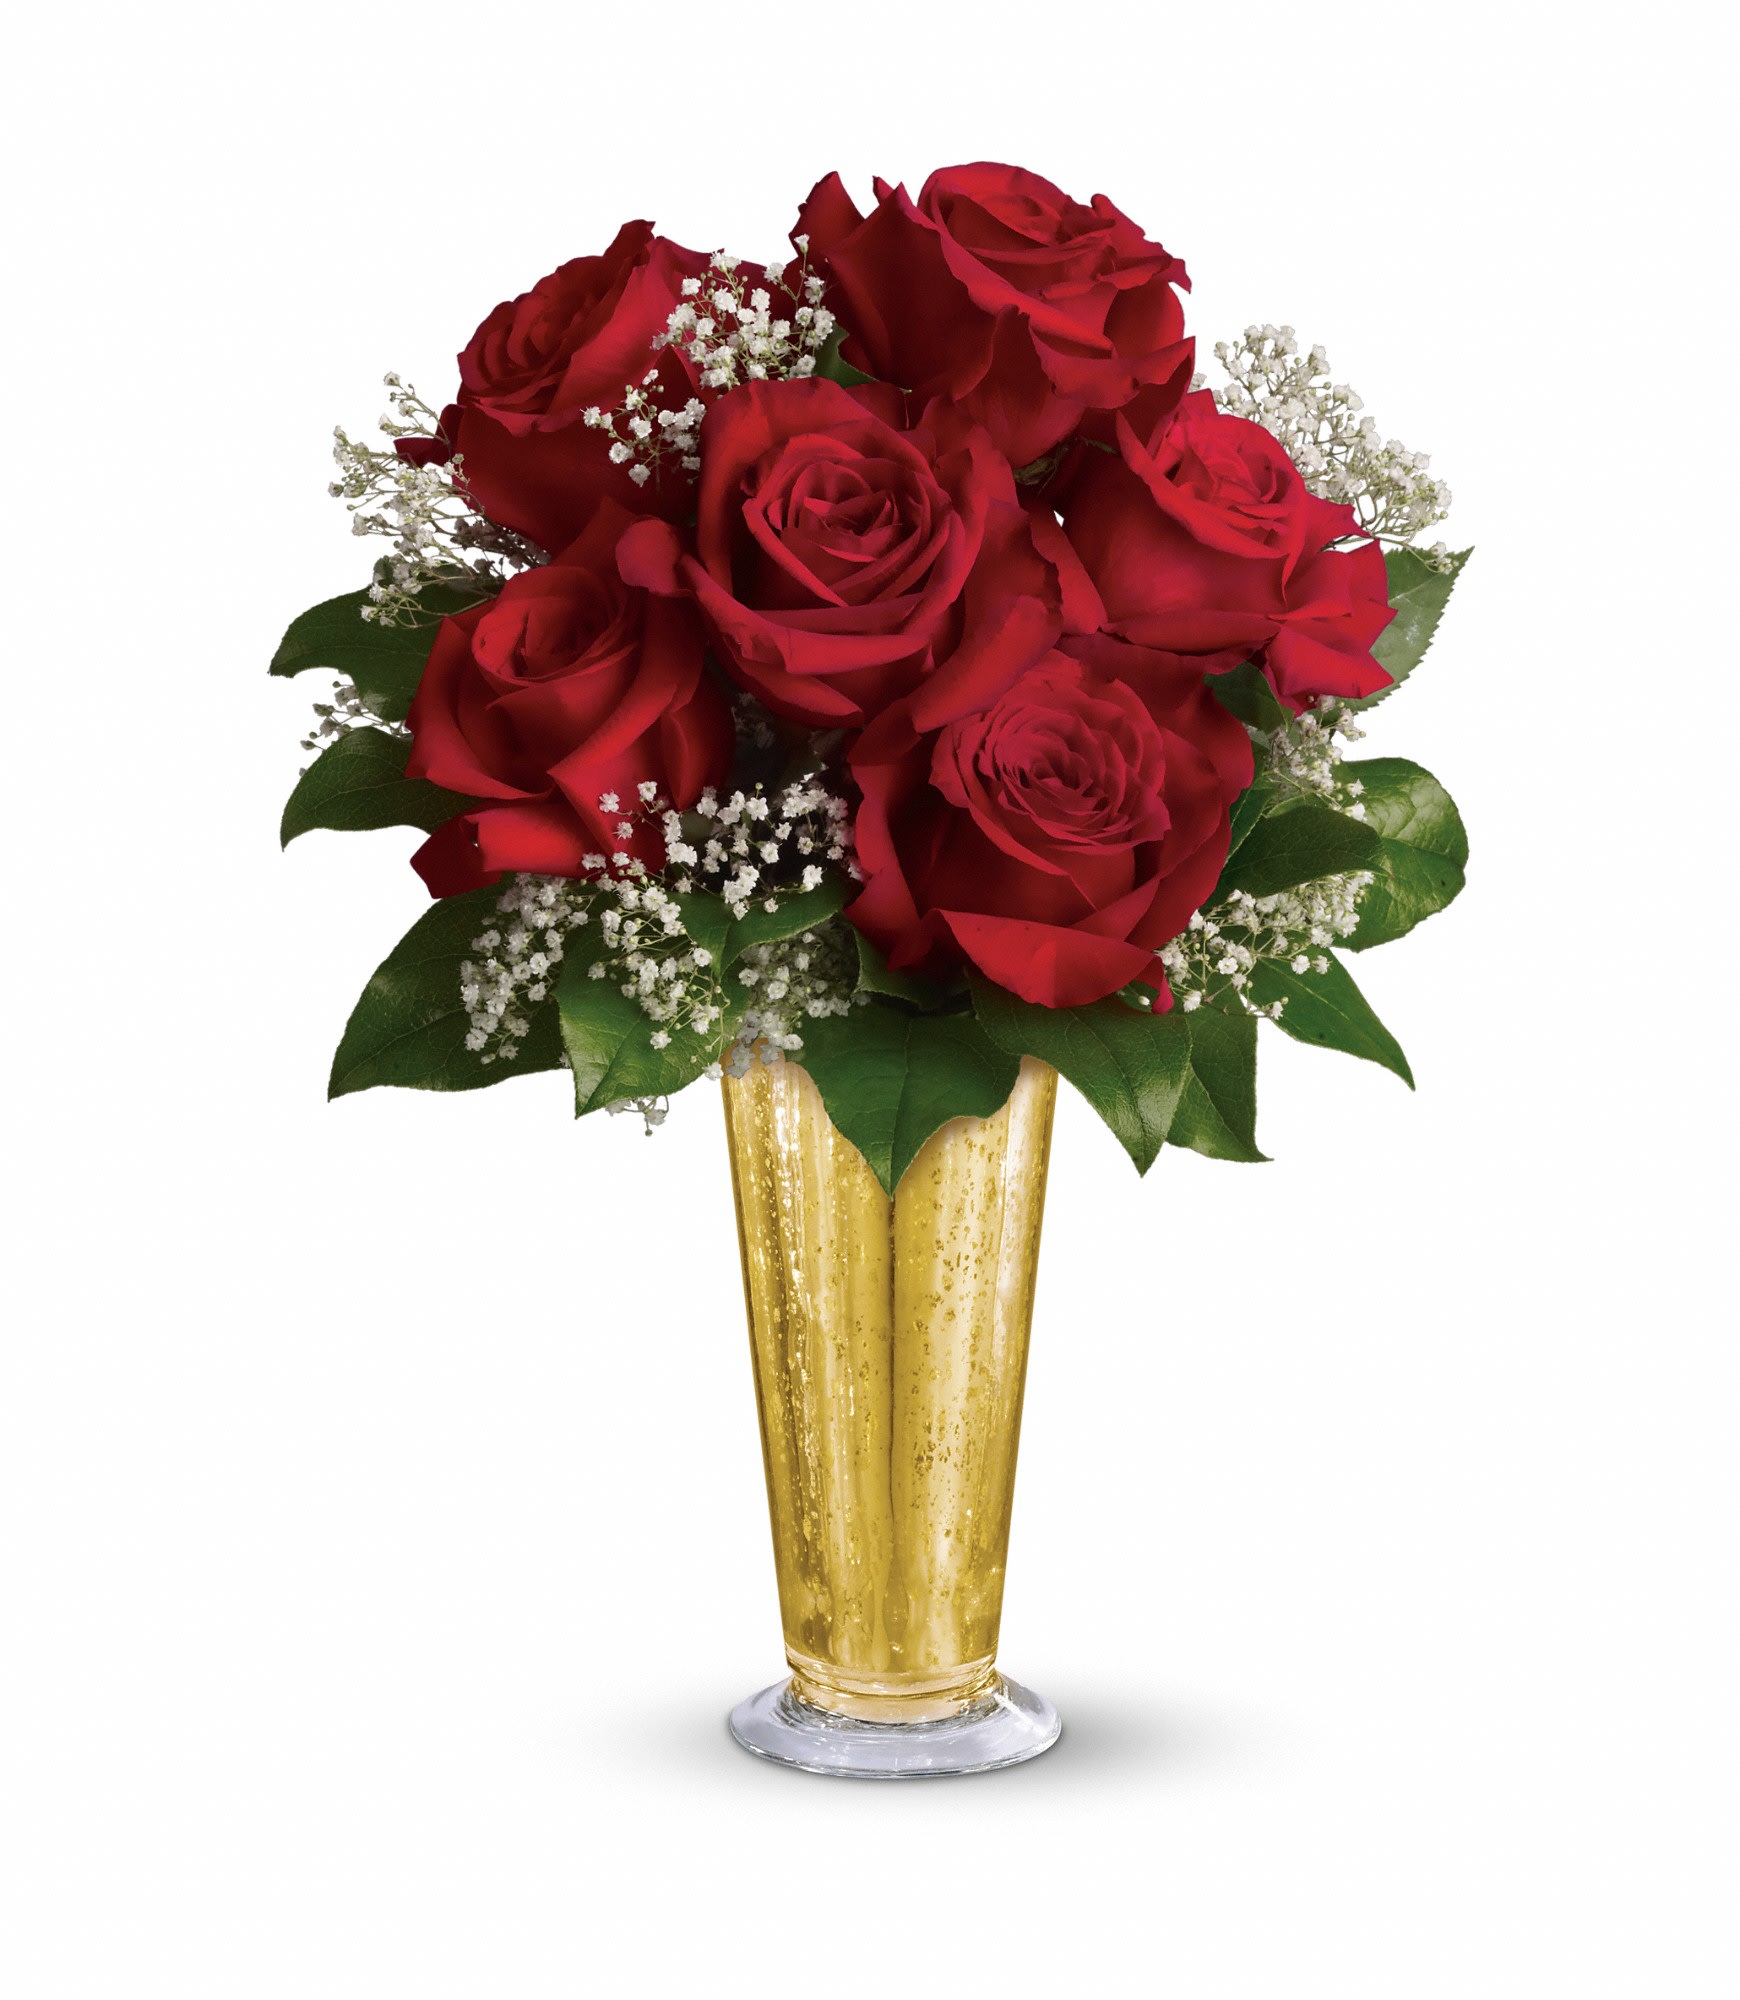 Loving You by Teleflora - Rich red roses and golden mercury glass are a vision of classic romance! Steal her heart again with this loving tribute!  